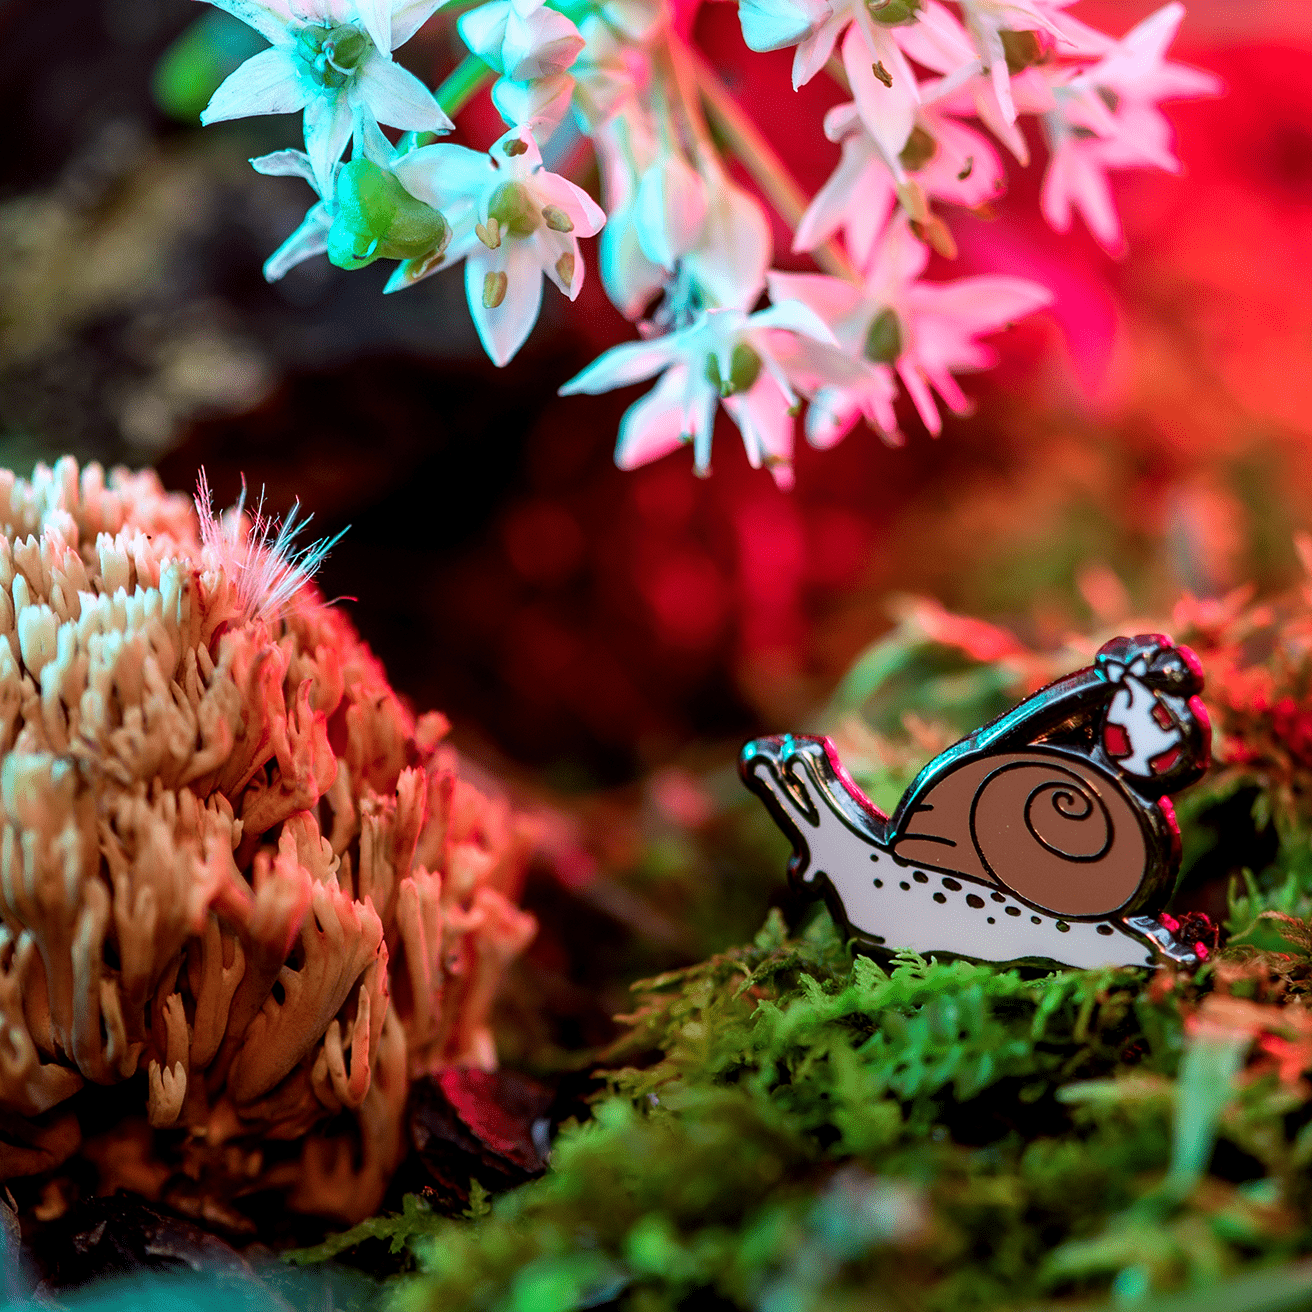 Rover the Snail Mini Pin by The Roving House, featuring a hobo or runaway snail with a bindle exploring moss, mushrooms, and garlic flowers.